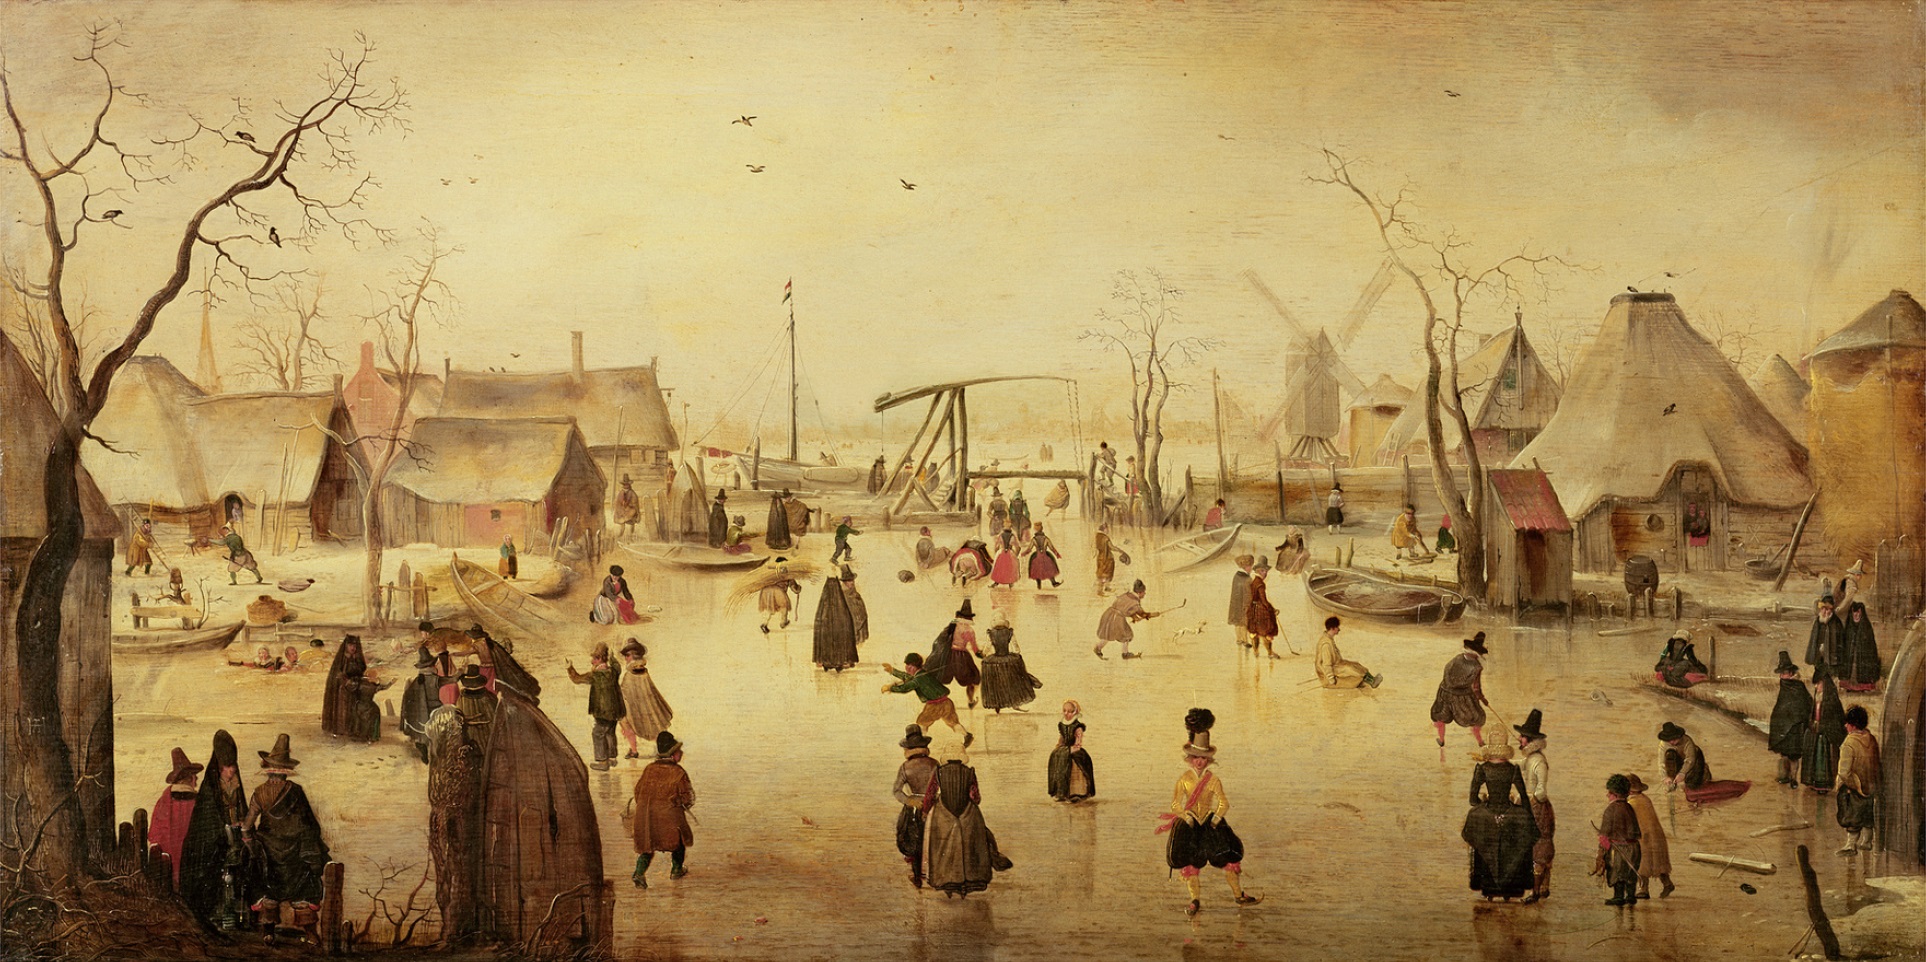 Among other things, the harsh winters during the “Little Ice Age” provided Dutch painters with motifs which have since entered into collective European consciousness. This is "The Pleasures of Winter", a 17th-century painting by Hendrick Avercamp (1585-1634).  Source: The Bridgeman Art Library, Object 39769, Wikimedia